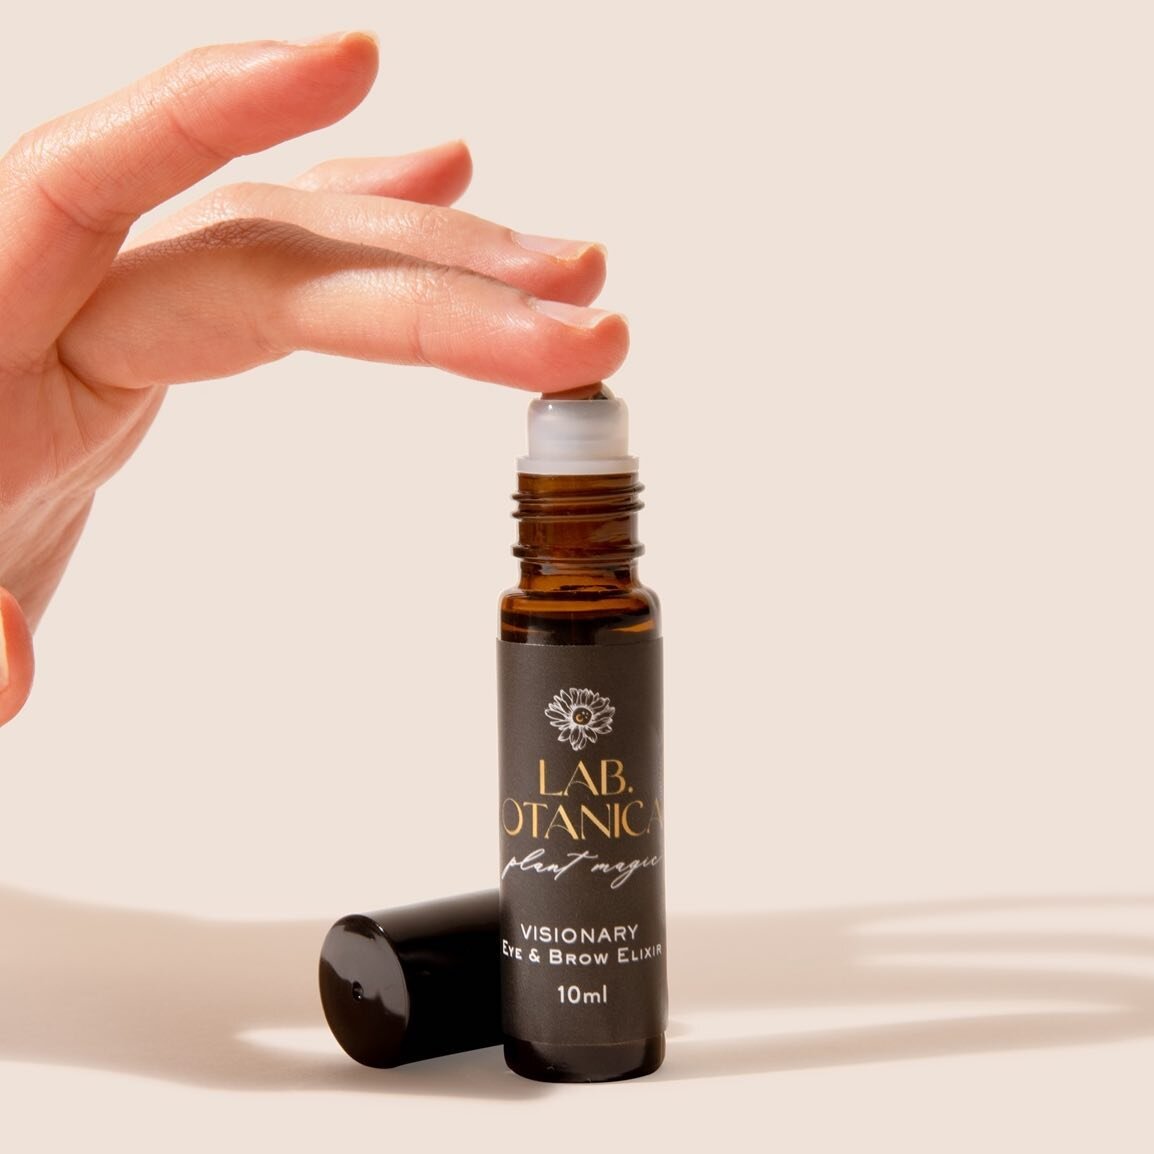 👉Introducing the superpowers of Visionary - a luxurious elixir that combines the ancient wisdom of the Egyptians with the power of modern botanicals.⁠
⁠
Castor oil, a natural remedy for eye ailments, soothes irritations and reduces the appearance of